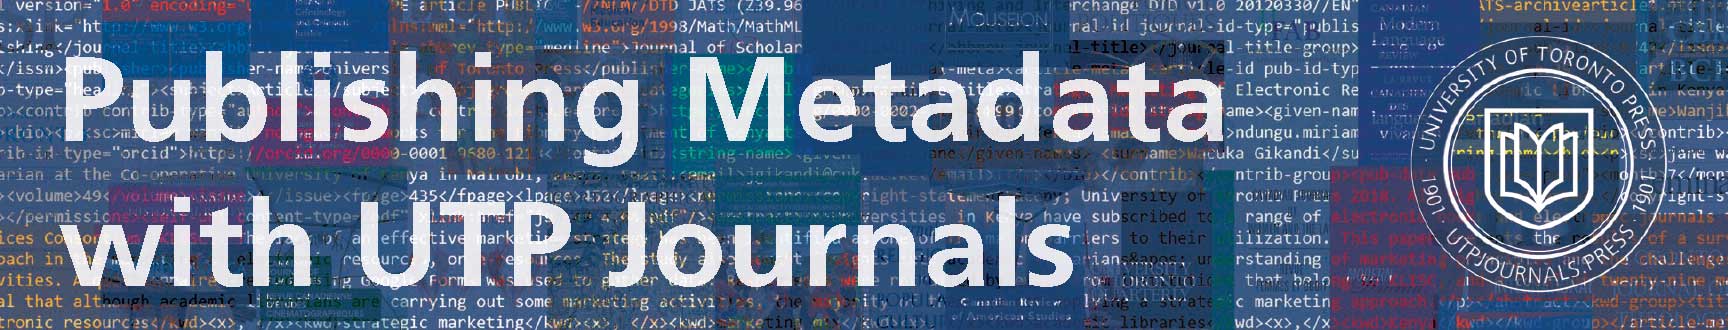 XML Code over Journal Covers